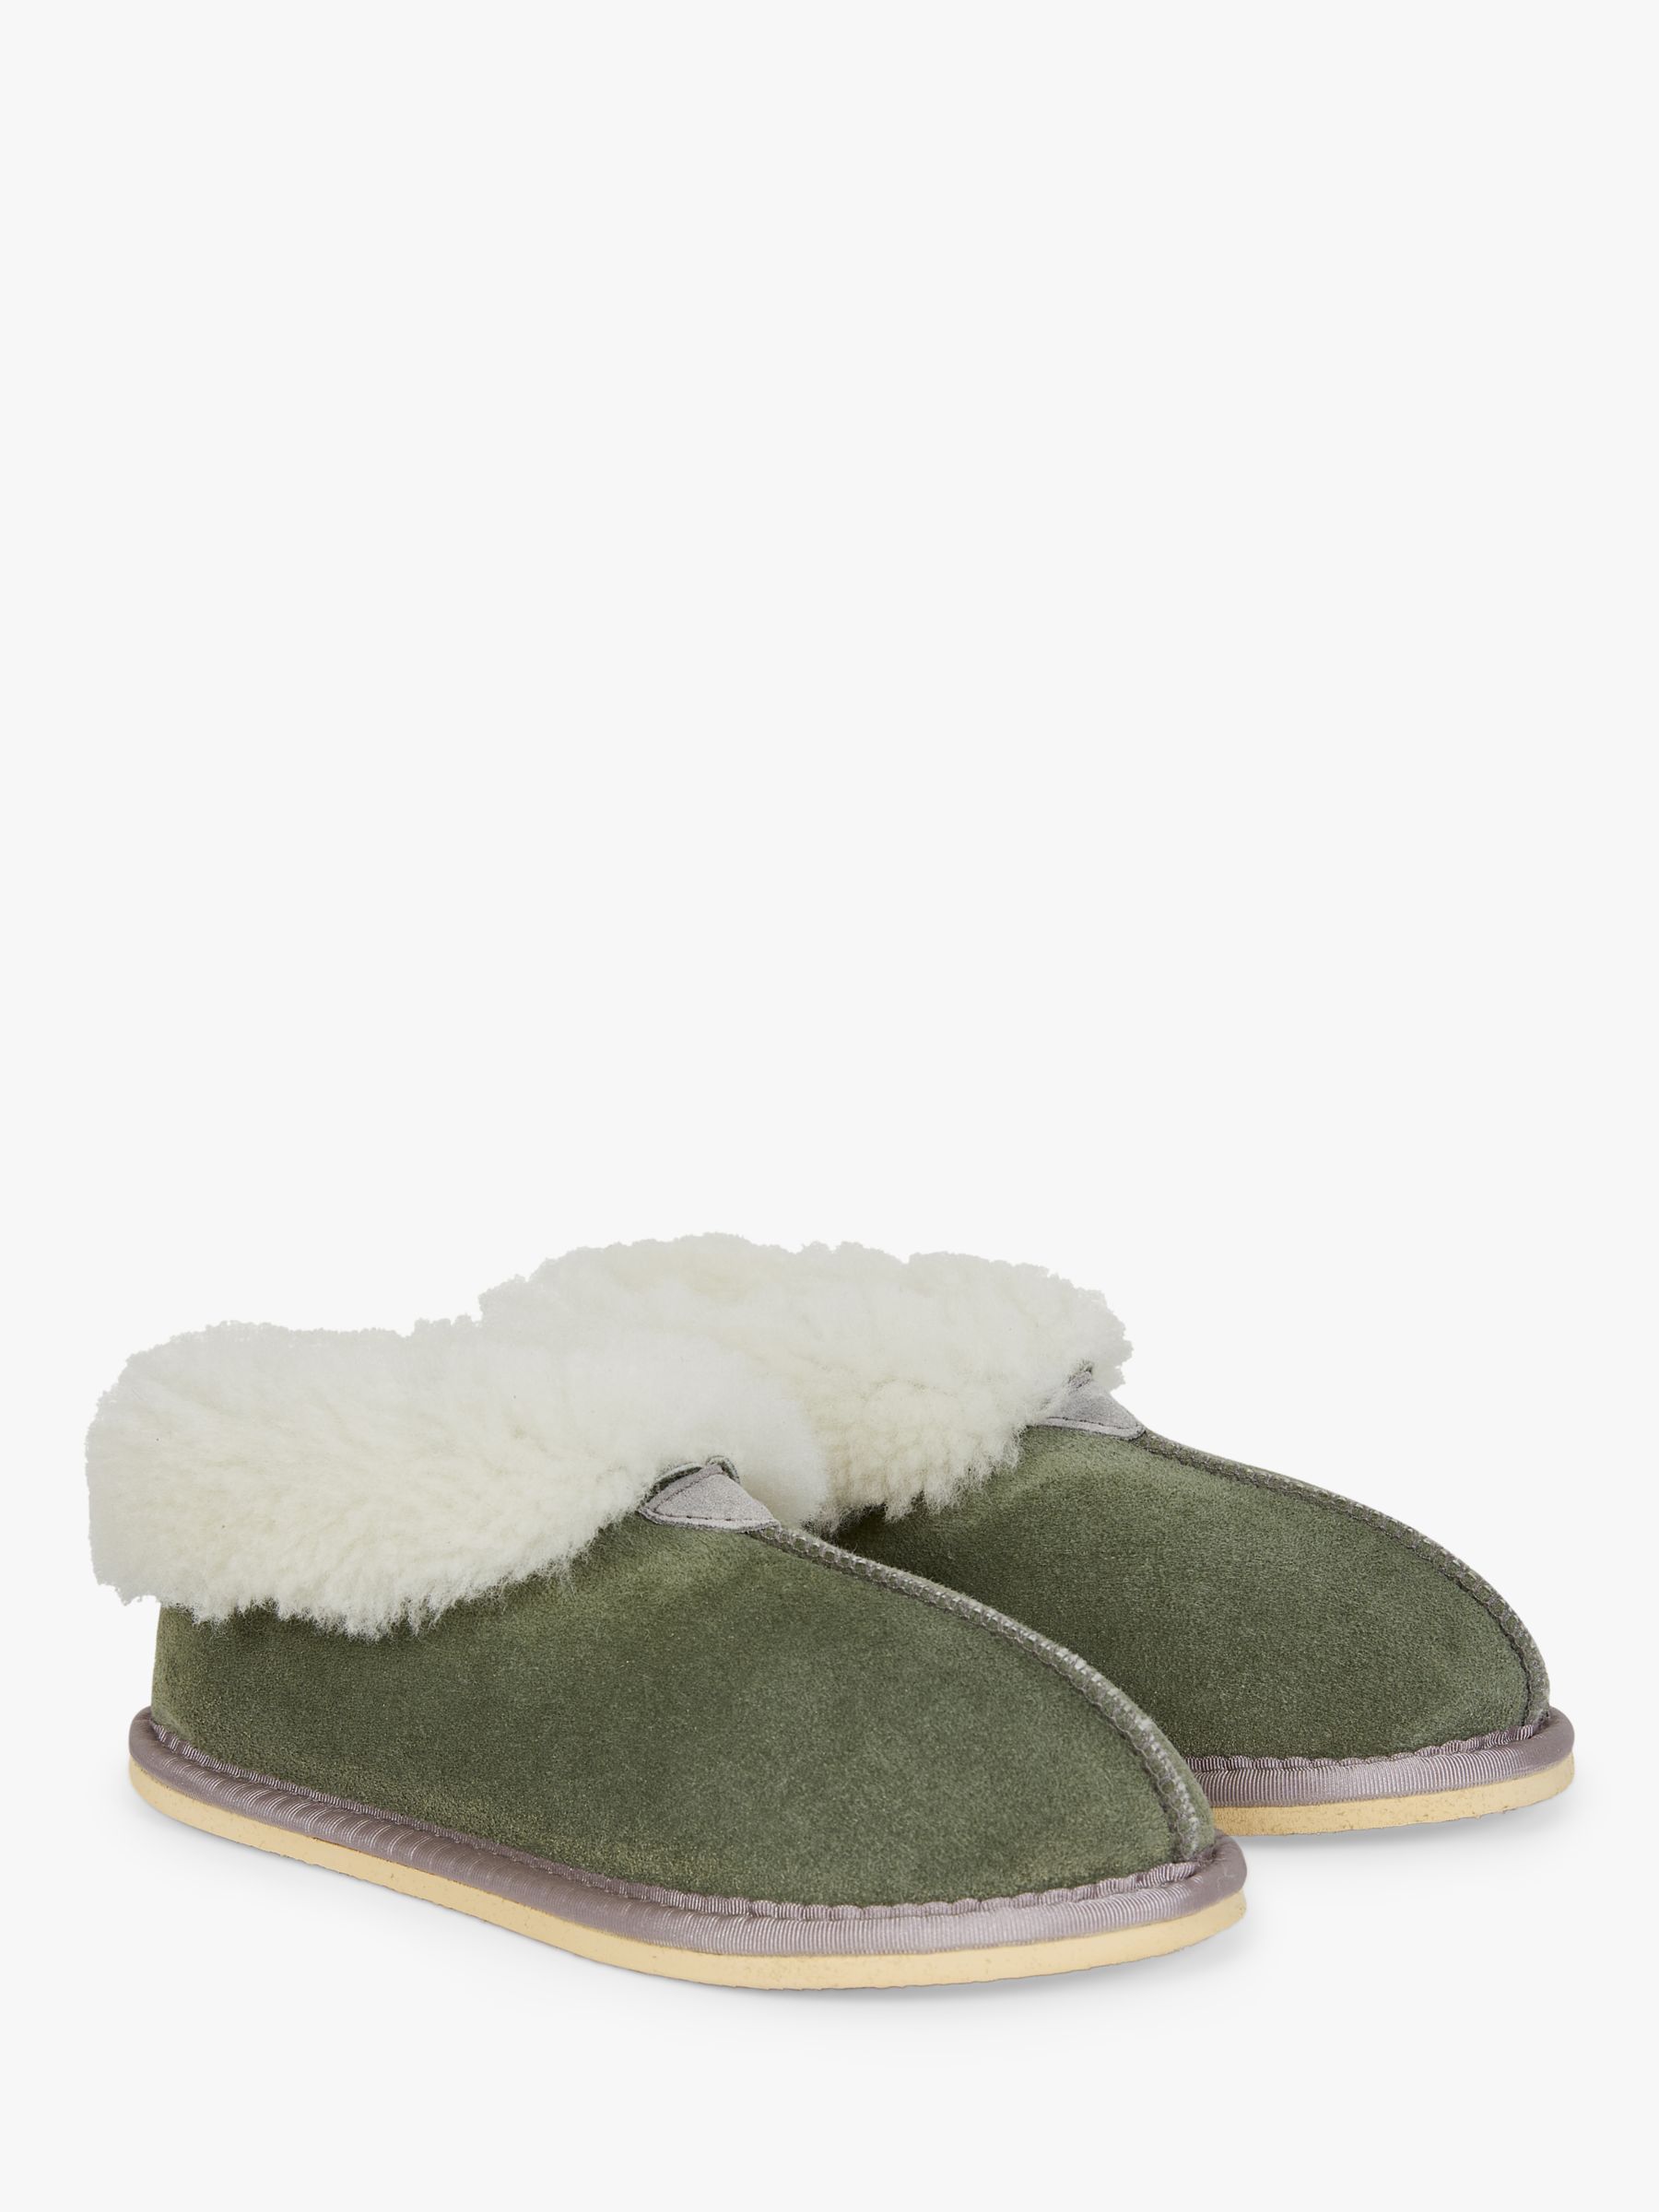 Celtic & Co. Sheepskin Bootee Slippers, Sage at John Lewis & Partners